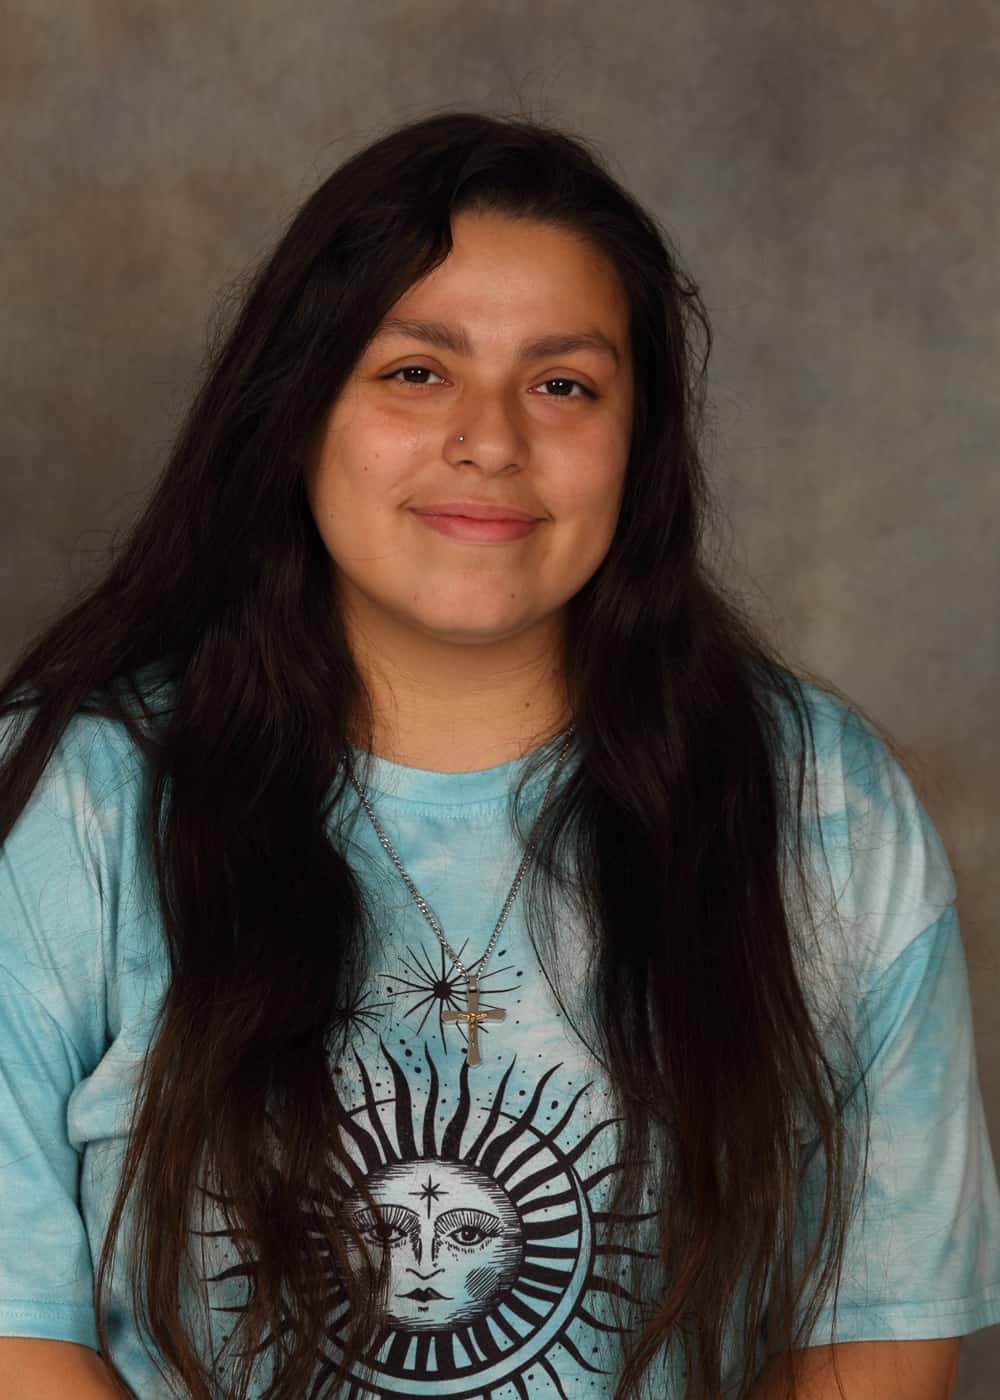 Photo of Co-Teacher Amy Chech. She is a Caucasian woman with long dark brown hair and brown eyes. She is smiling and wears a gold cross necklace and light blue ti-dyed T-shirt with a stylized black drawing of the Sun on it.